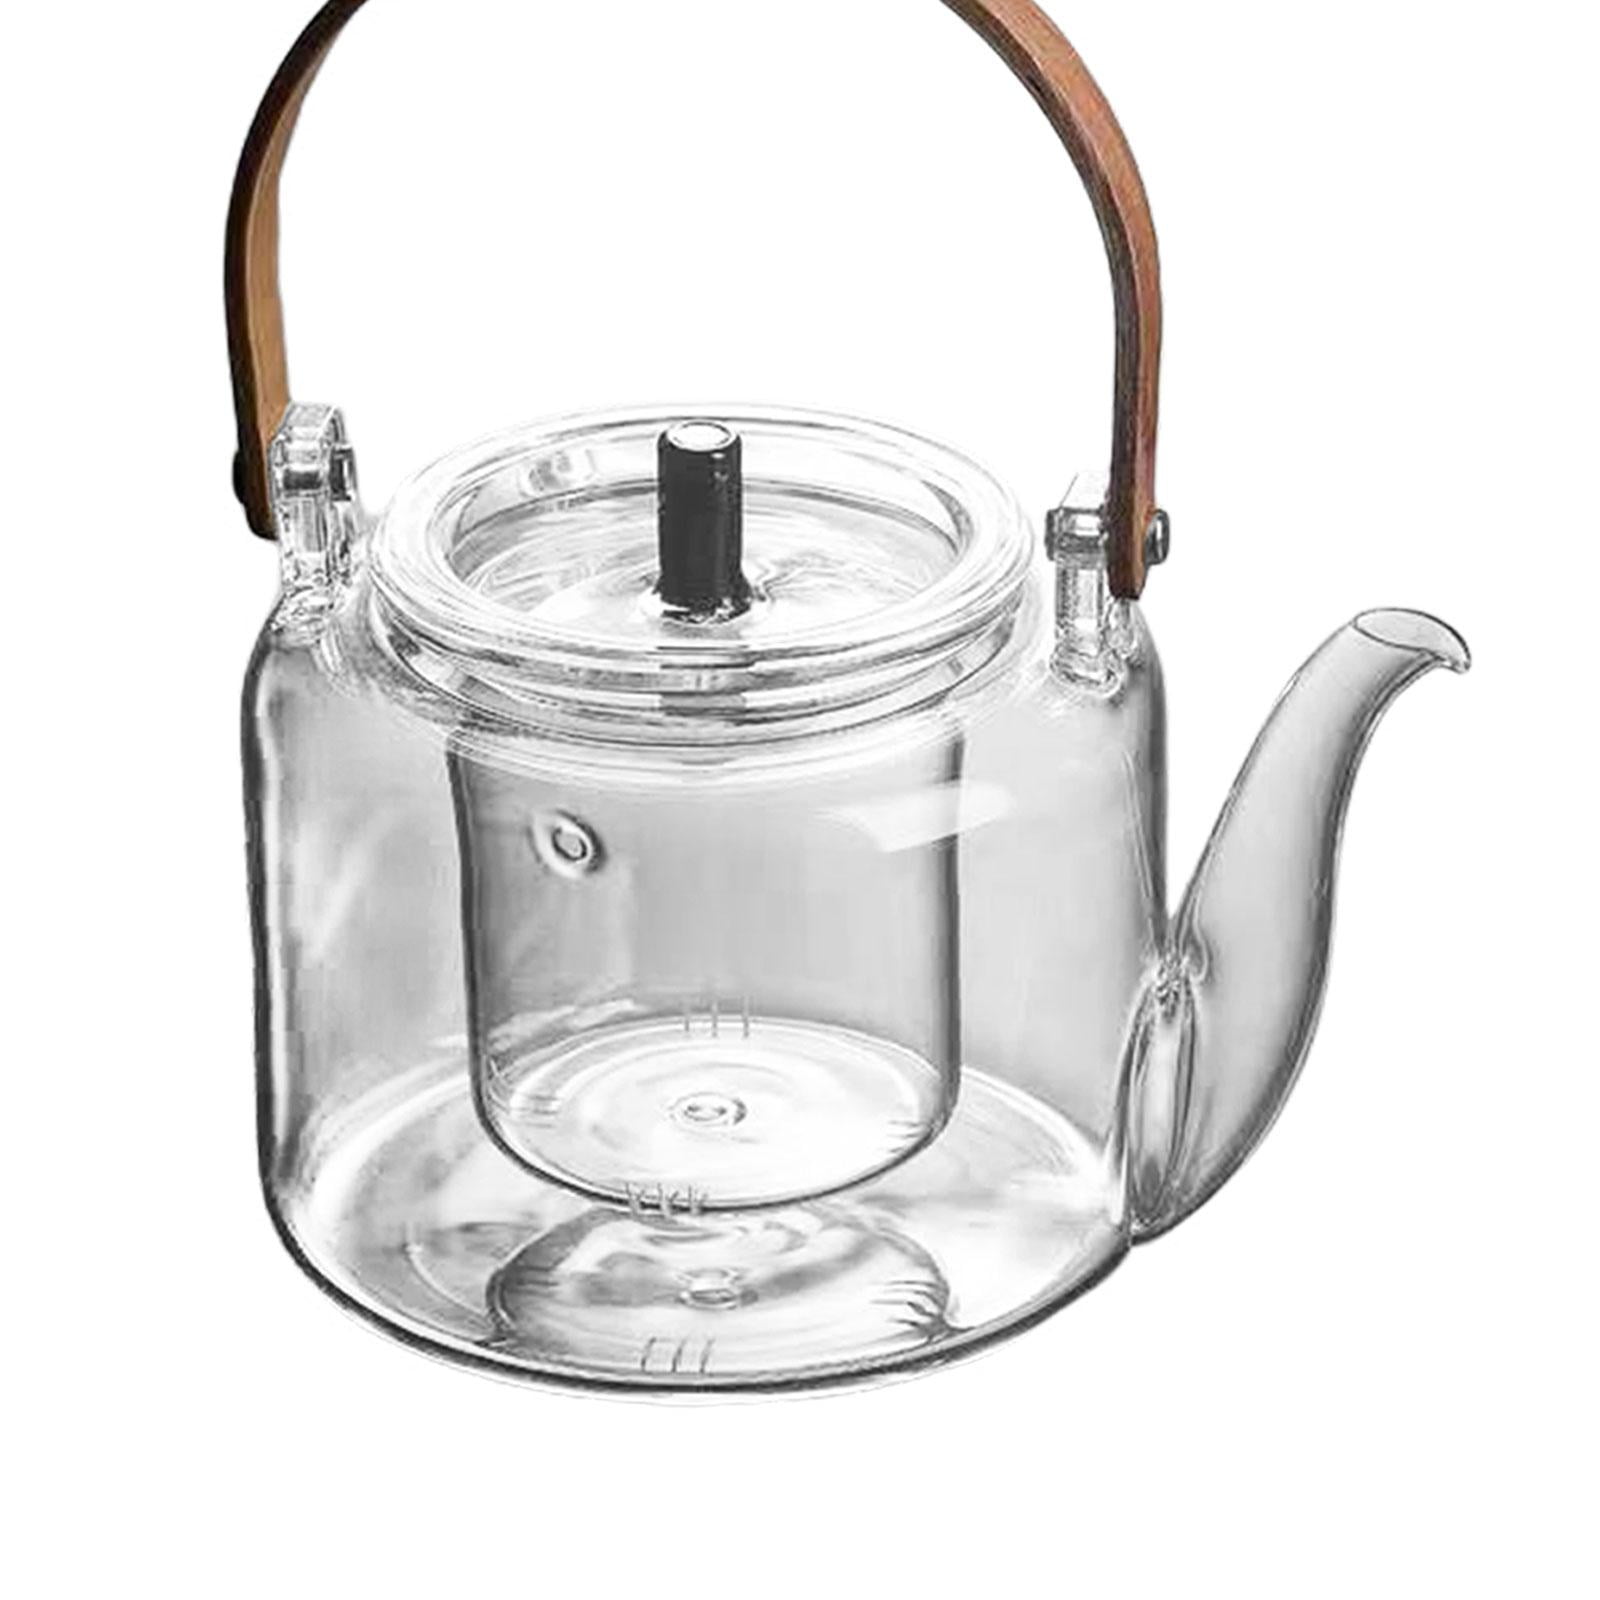 DOPUDO 1250ml/ 42oz Glass stovetop teapot for loose tea leaves, Glass Tea  Kettle with Removable Infuser, Heat Resistant Wood Handle for Blooming